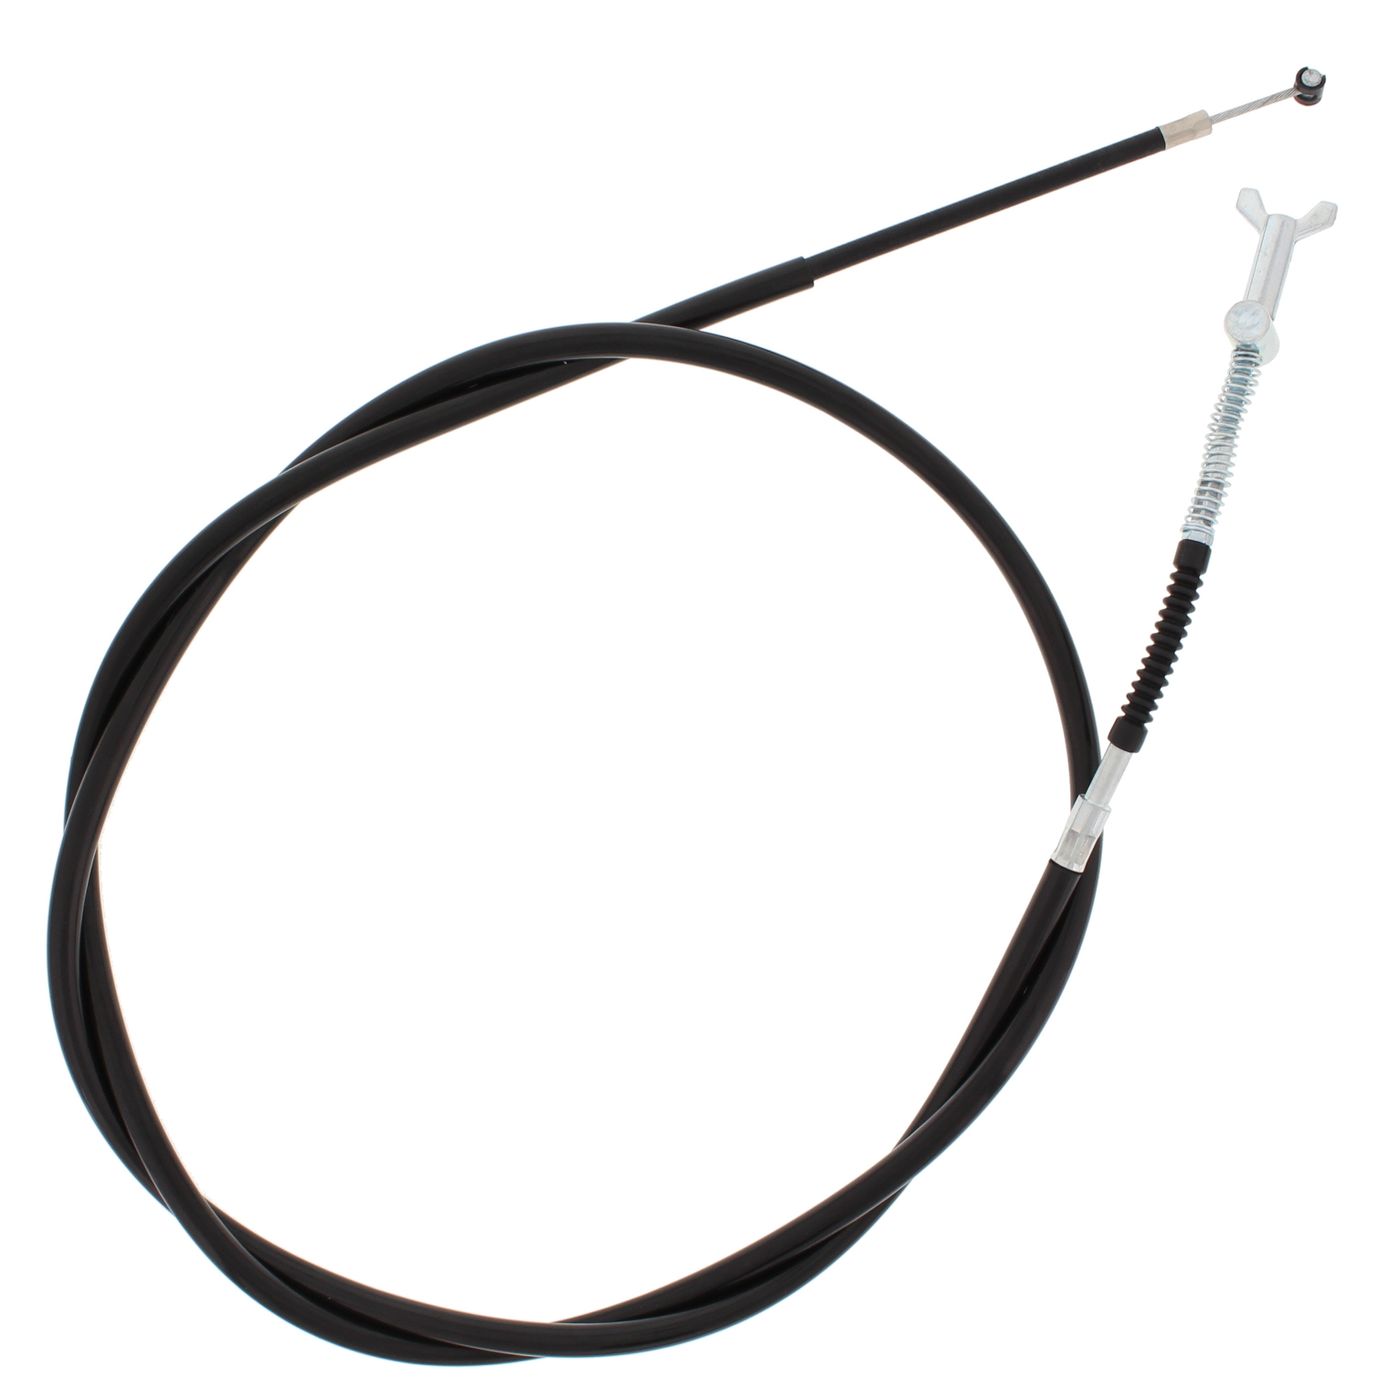 Wrp Brake Cables - WRP454009 image